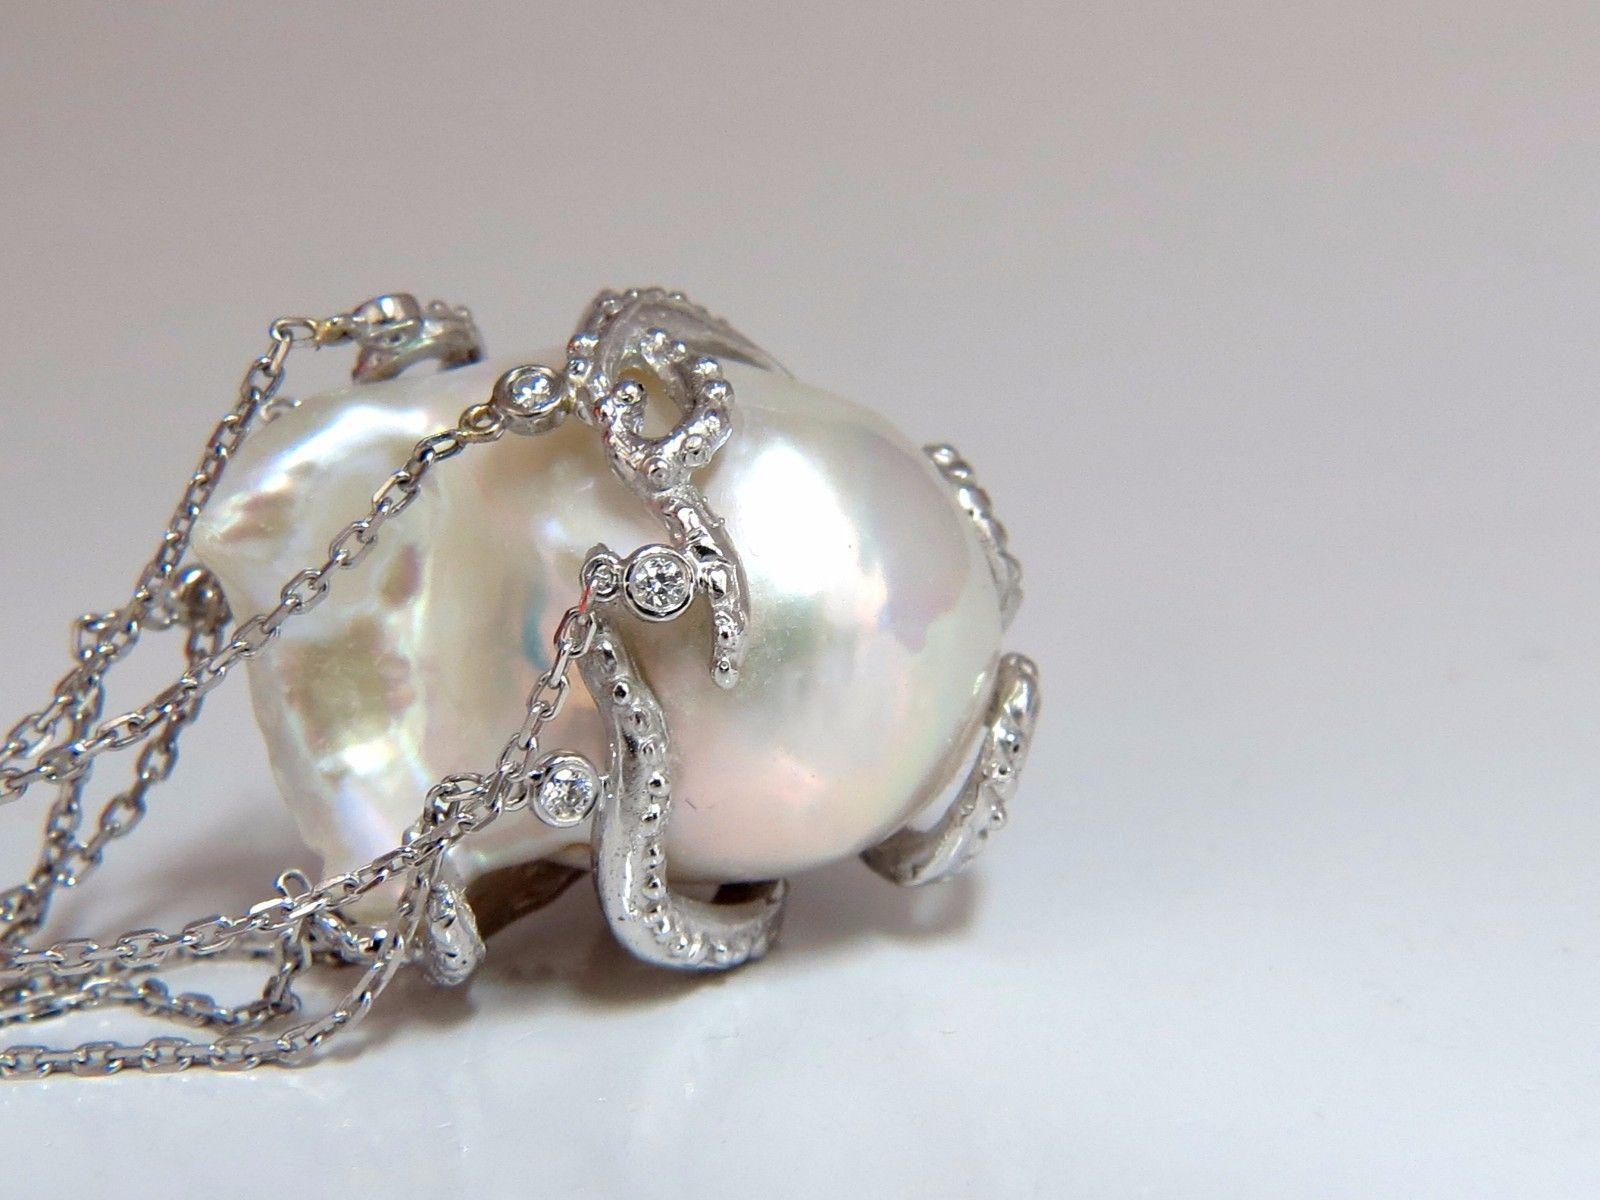 Octopus catch / dangle earrings.

30mm & 29mm natural Freshwater Baroque pearls.

GIA Certified

White with slight pink overtone.

clean clarity, No pits or naturals.

2.00cts of round natural color diamonds: 

G-color  Vs-2 clarity.

2.00ct (4)